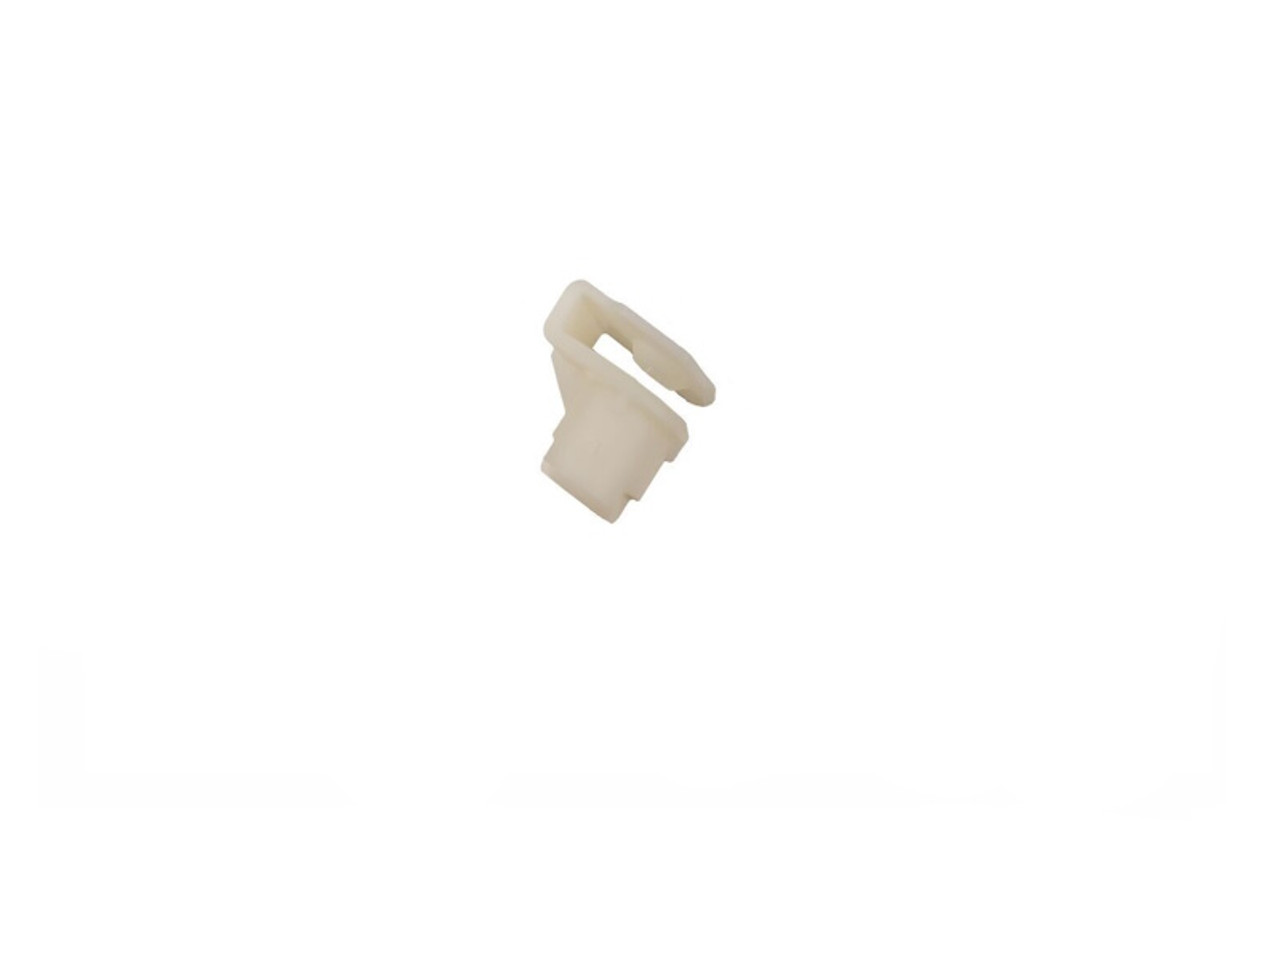 Allmakes 4x4 Discovery 4 Moulding Captive Nut - DYH500110